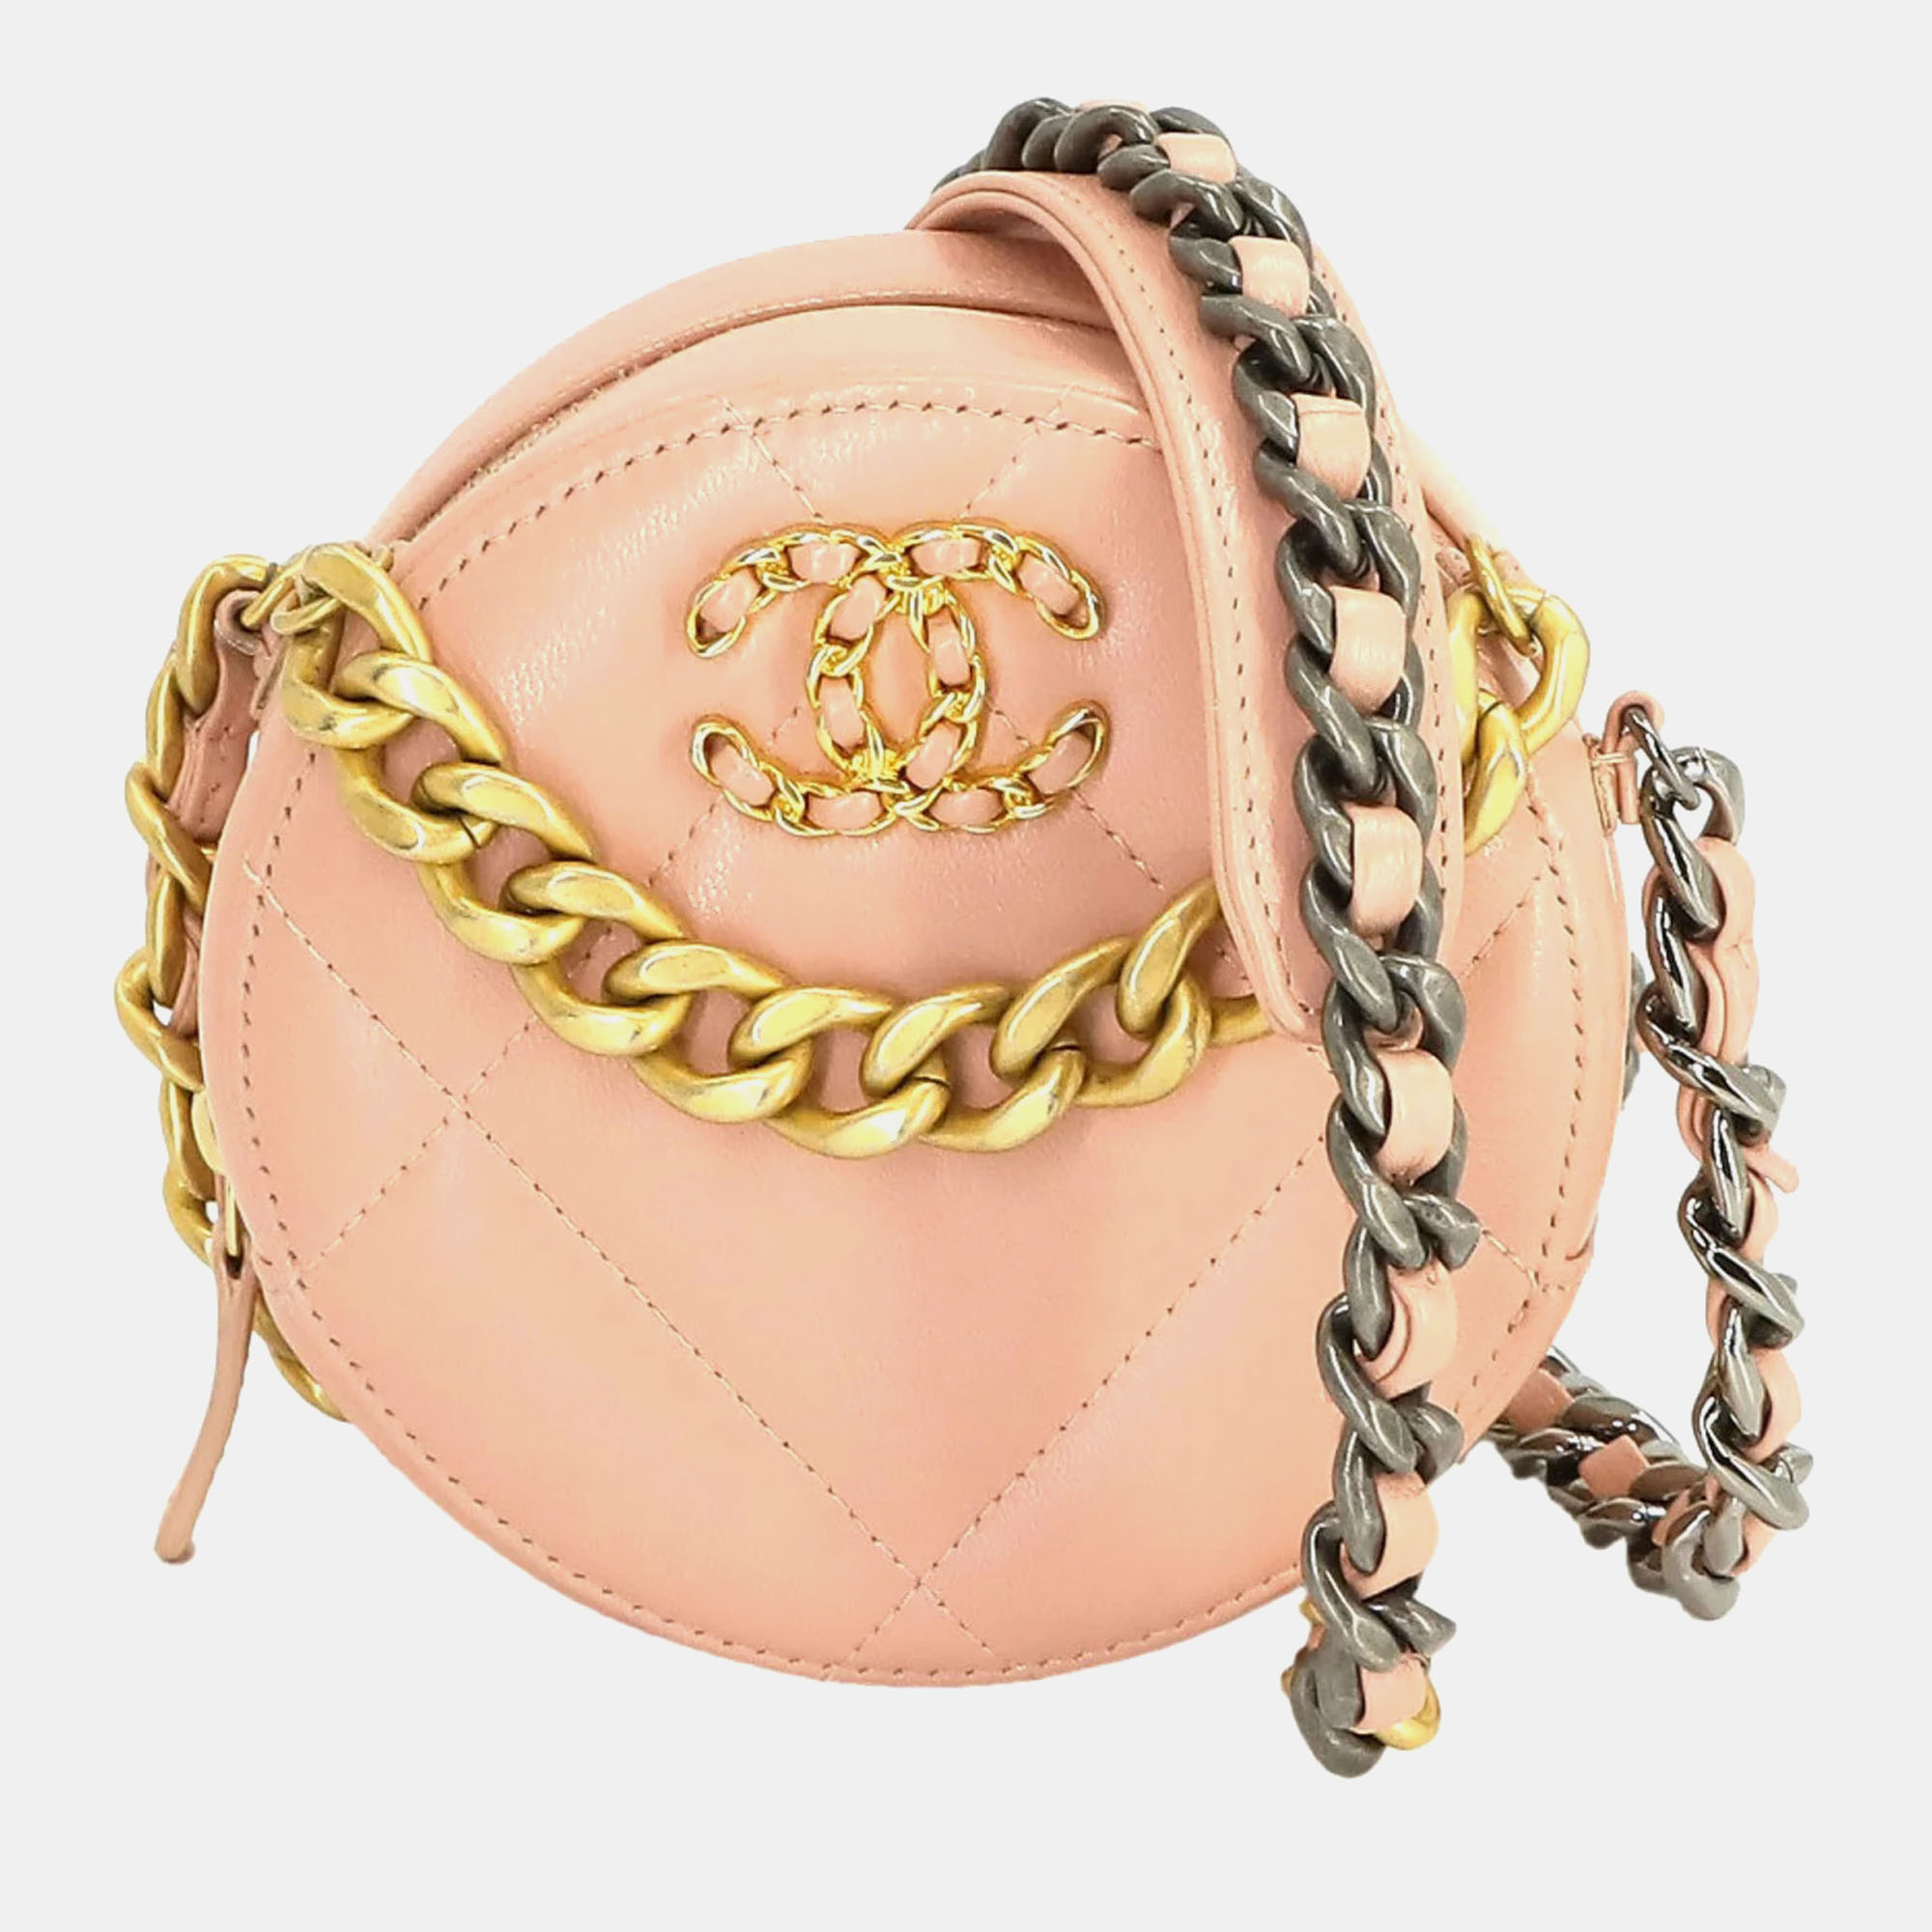 Chanel pink leather quilted 19 clutch with chain